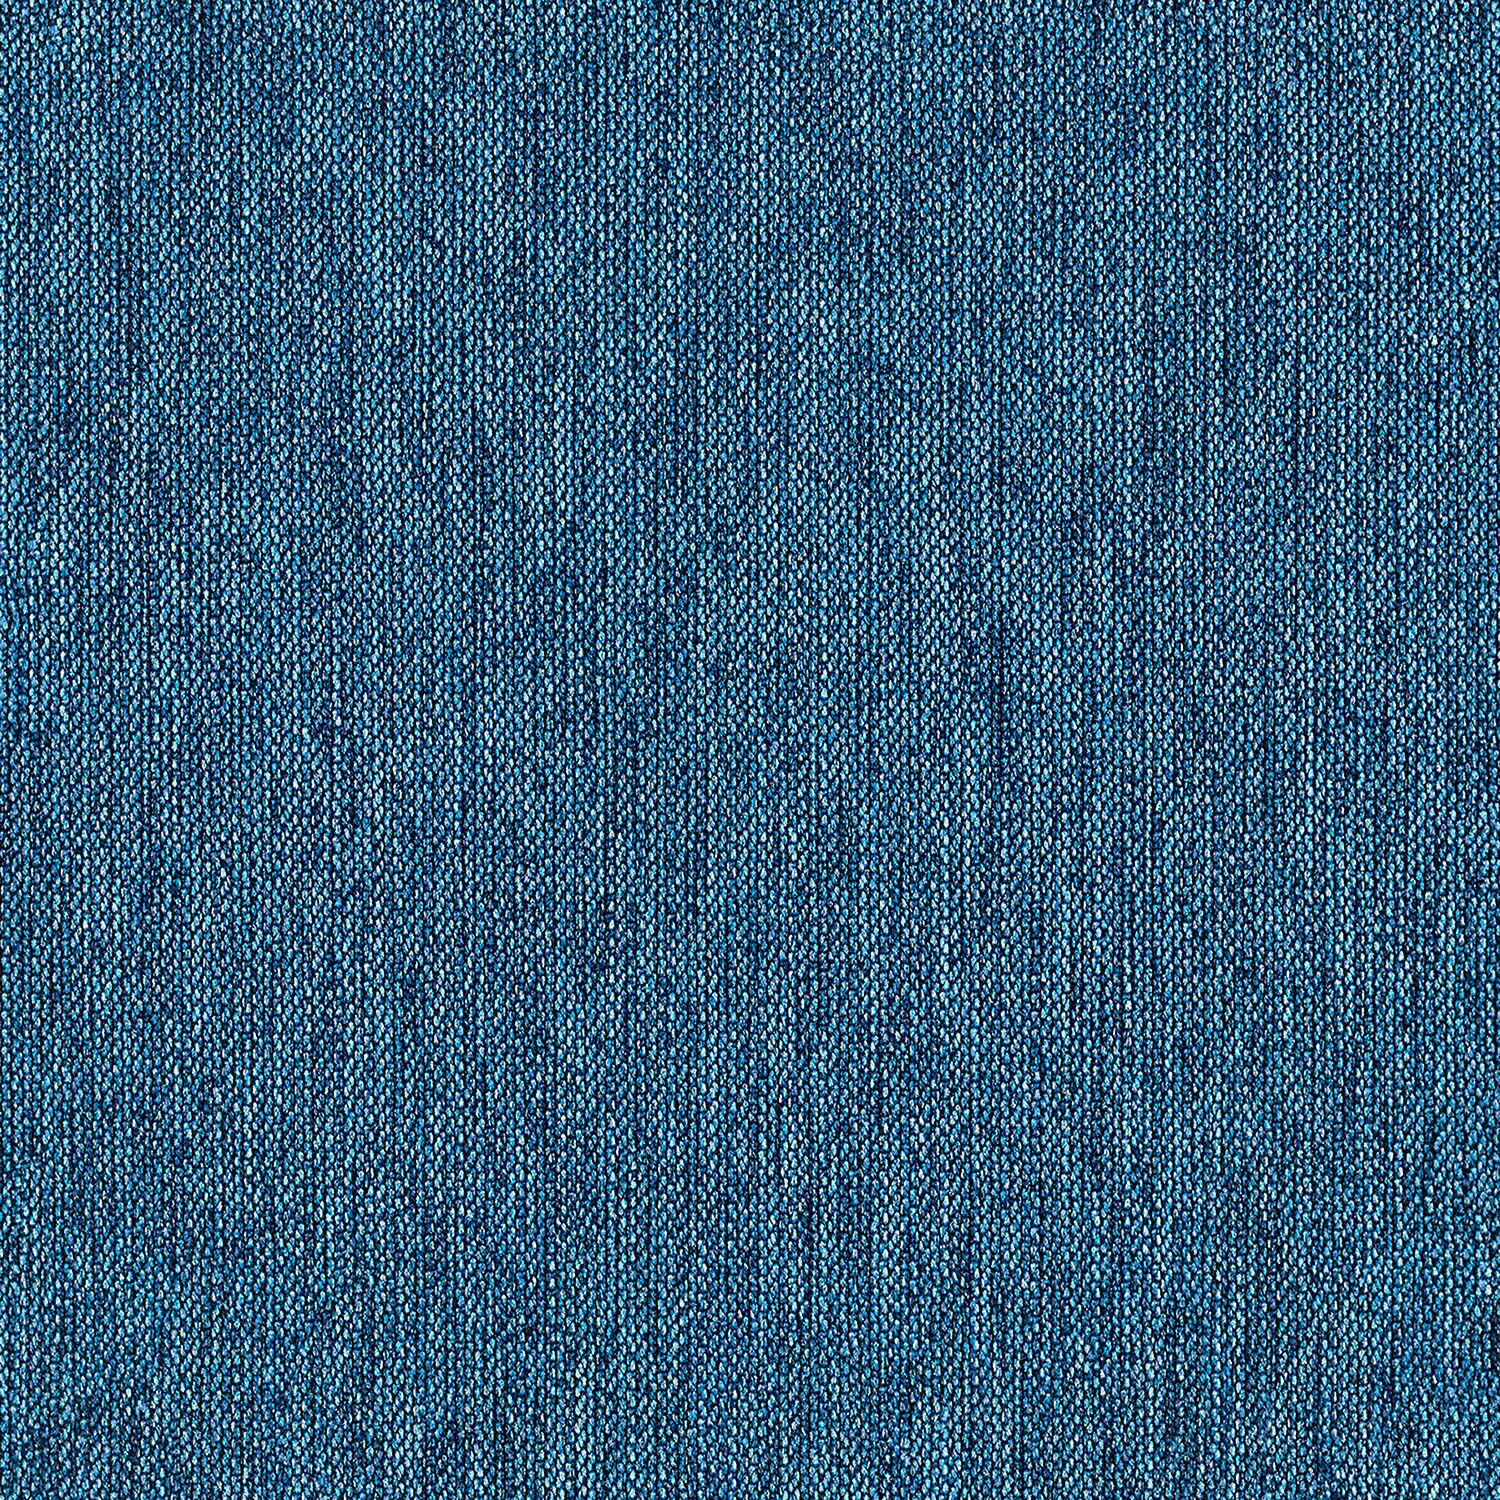 Percept - Placid - 4040 - 26 - Half Yard Tileable Swatches